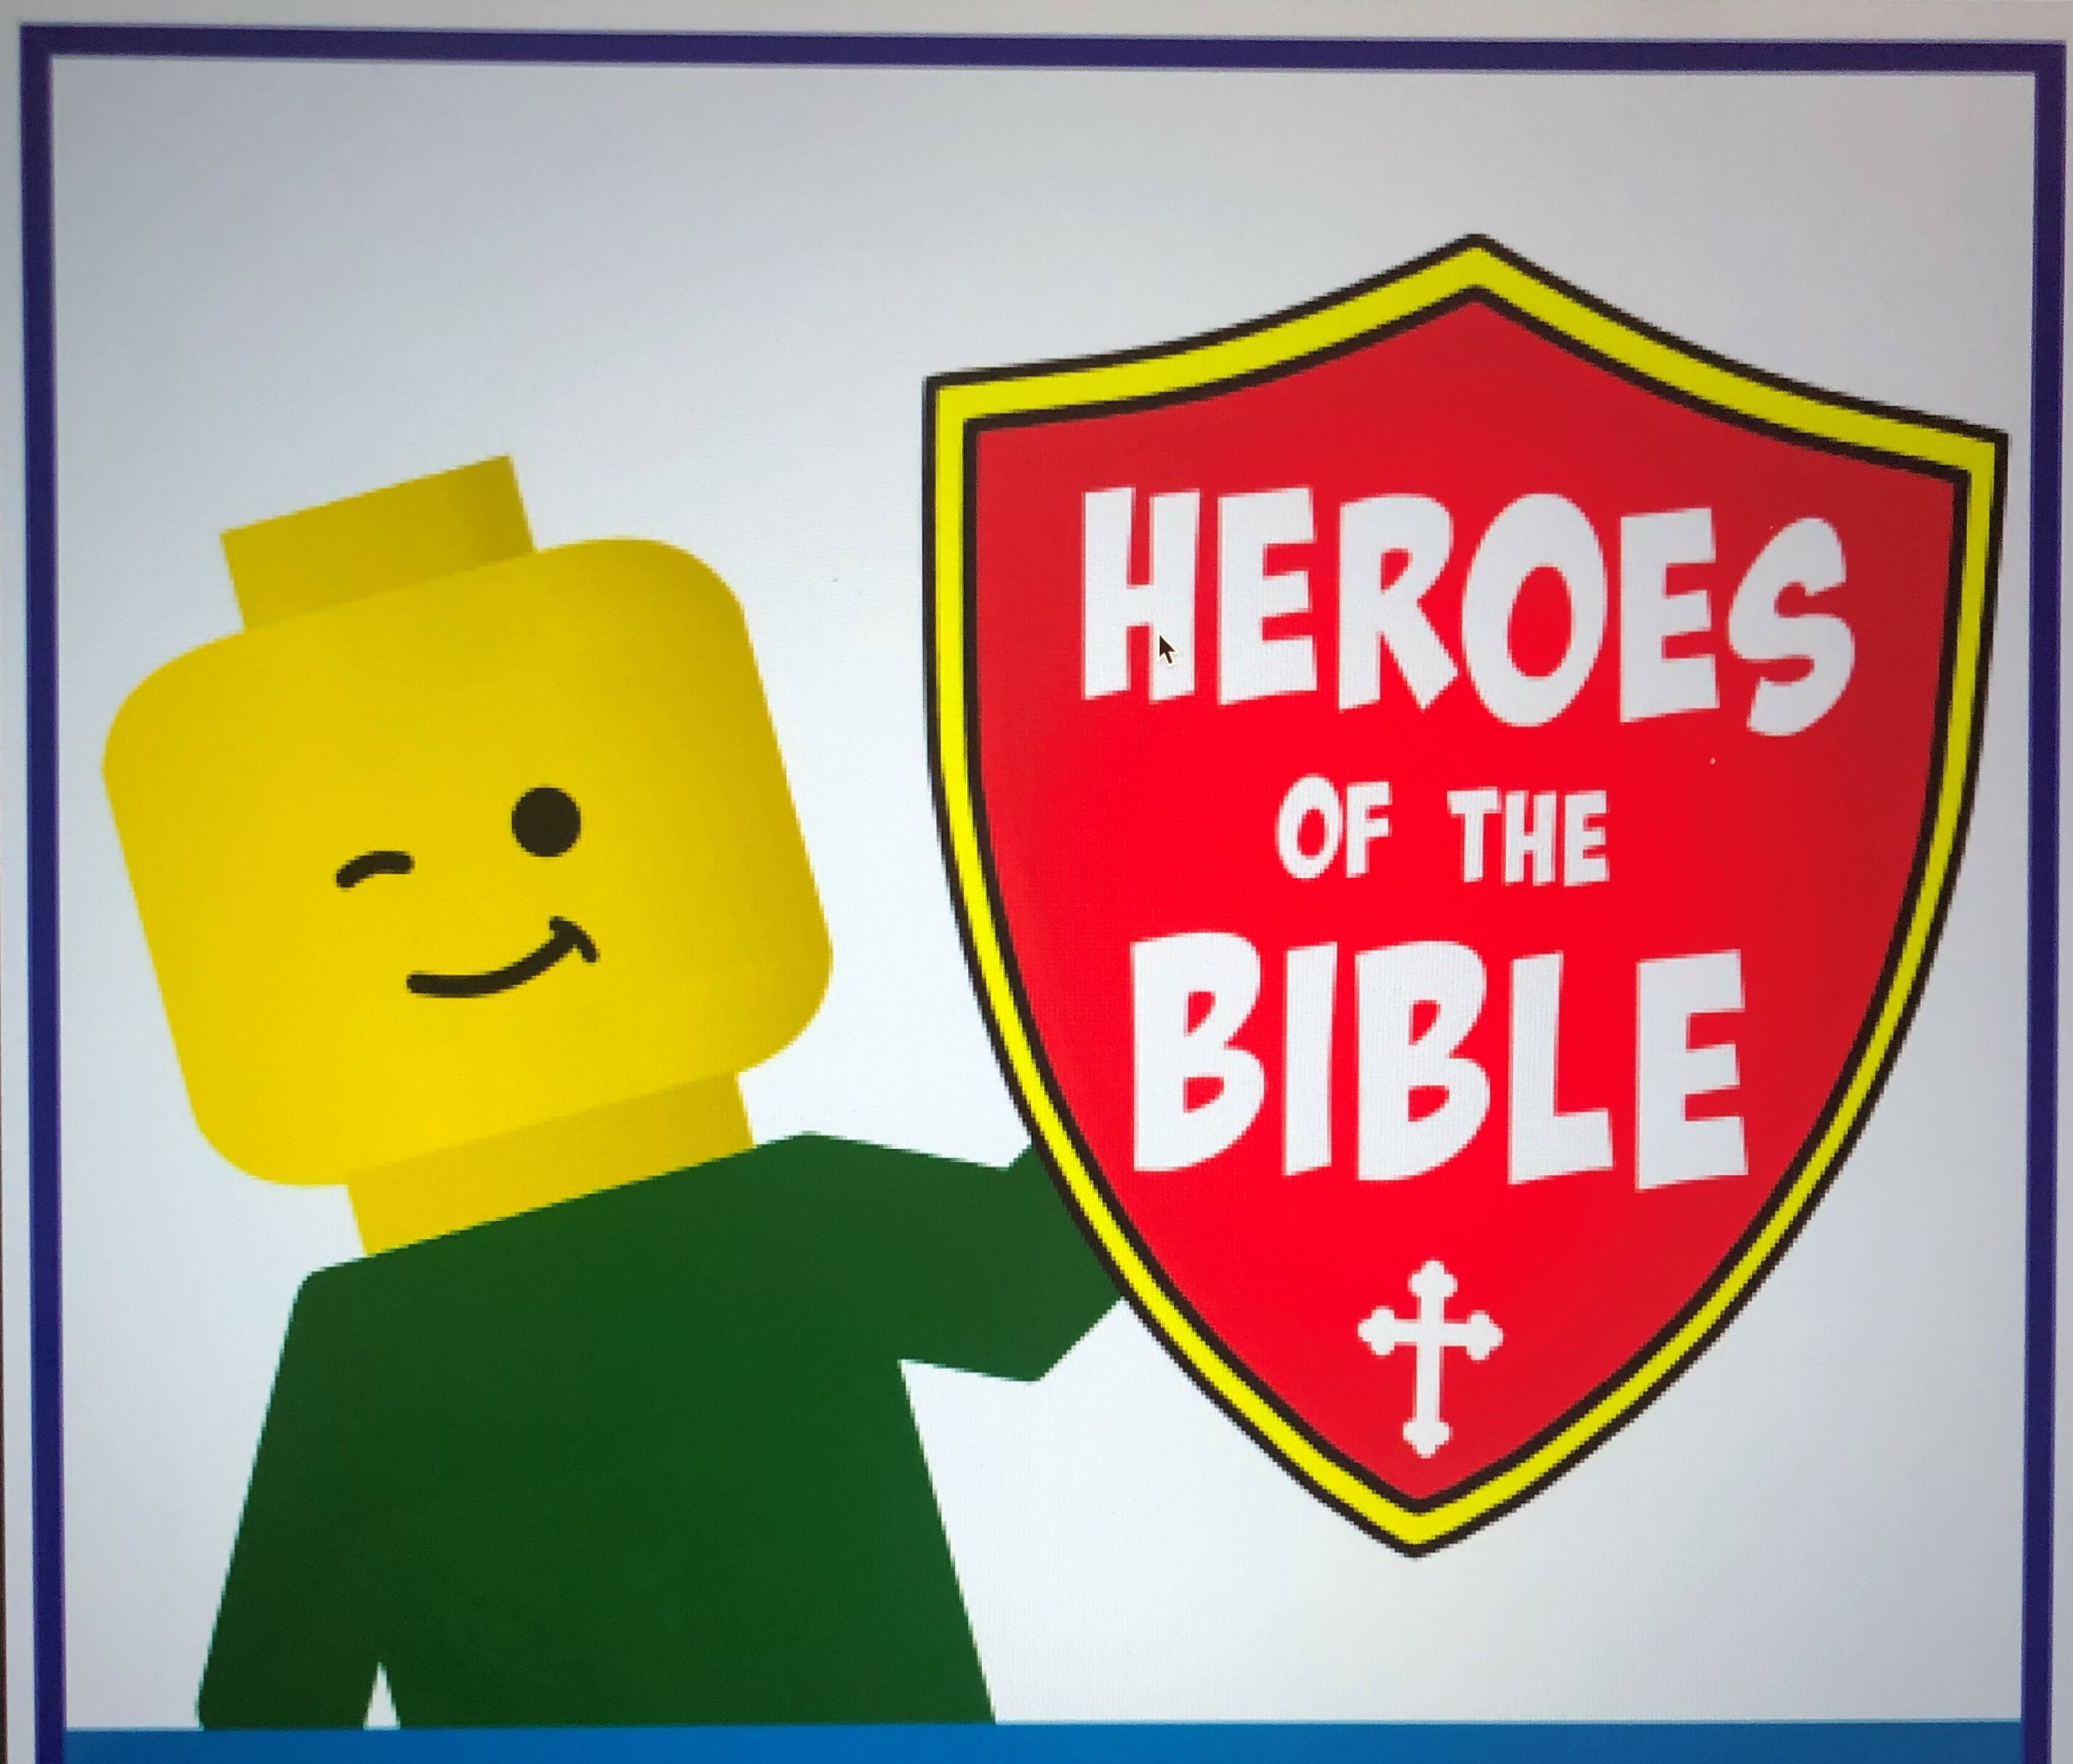 Heros of the Bible - Esther